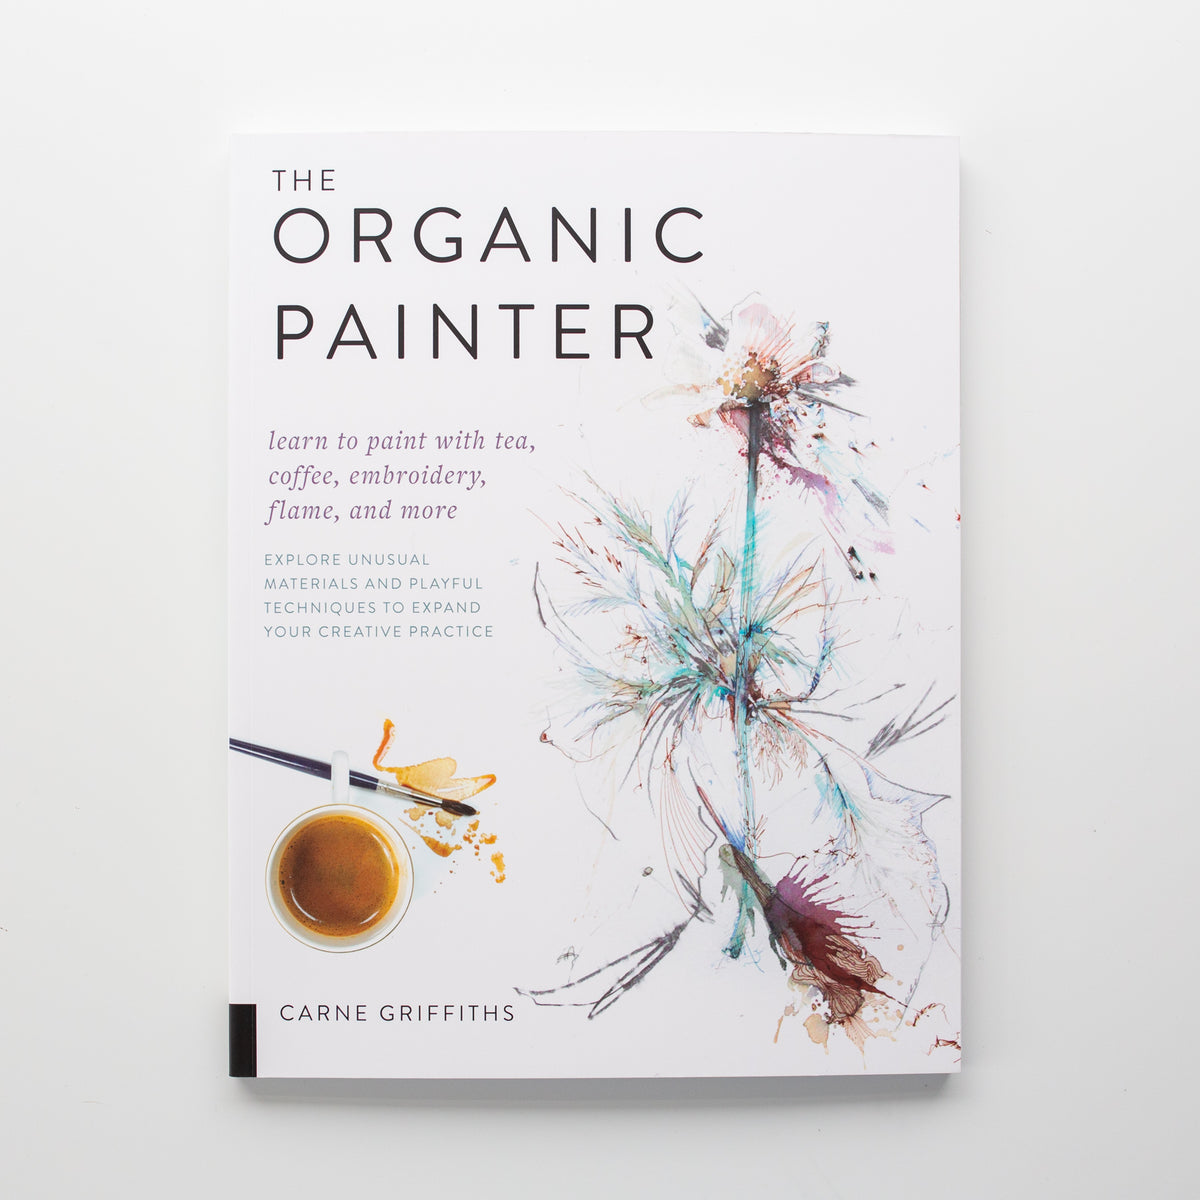 The Organic Painter' by Carne Griffiths